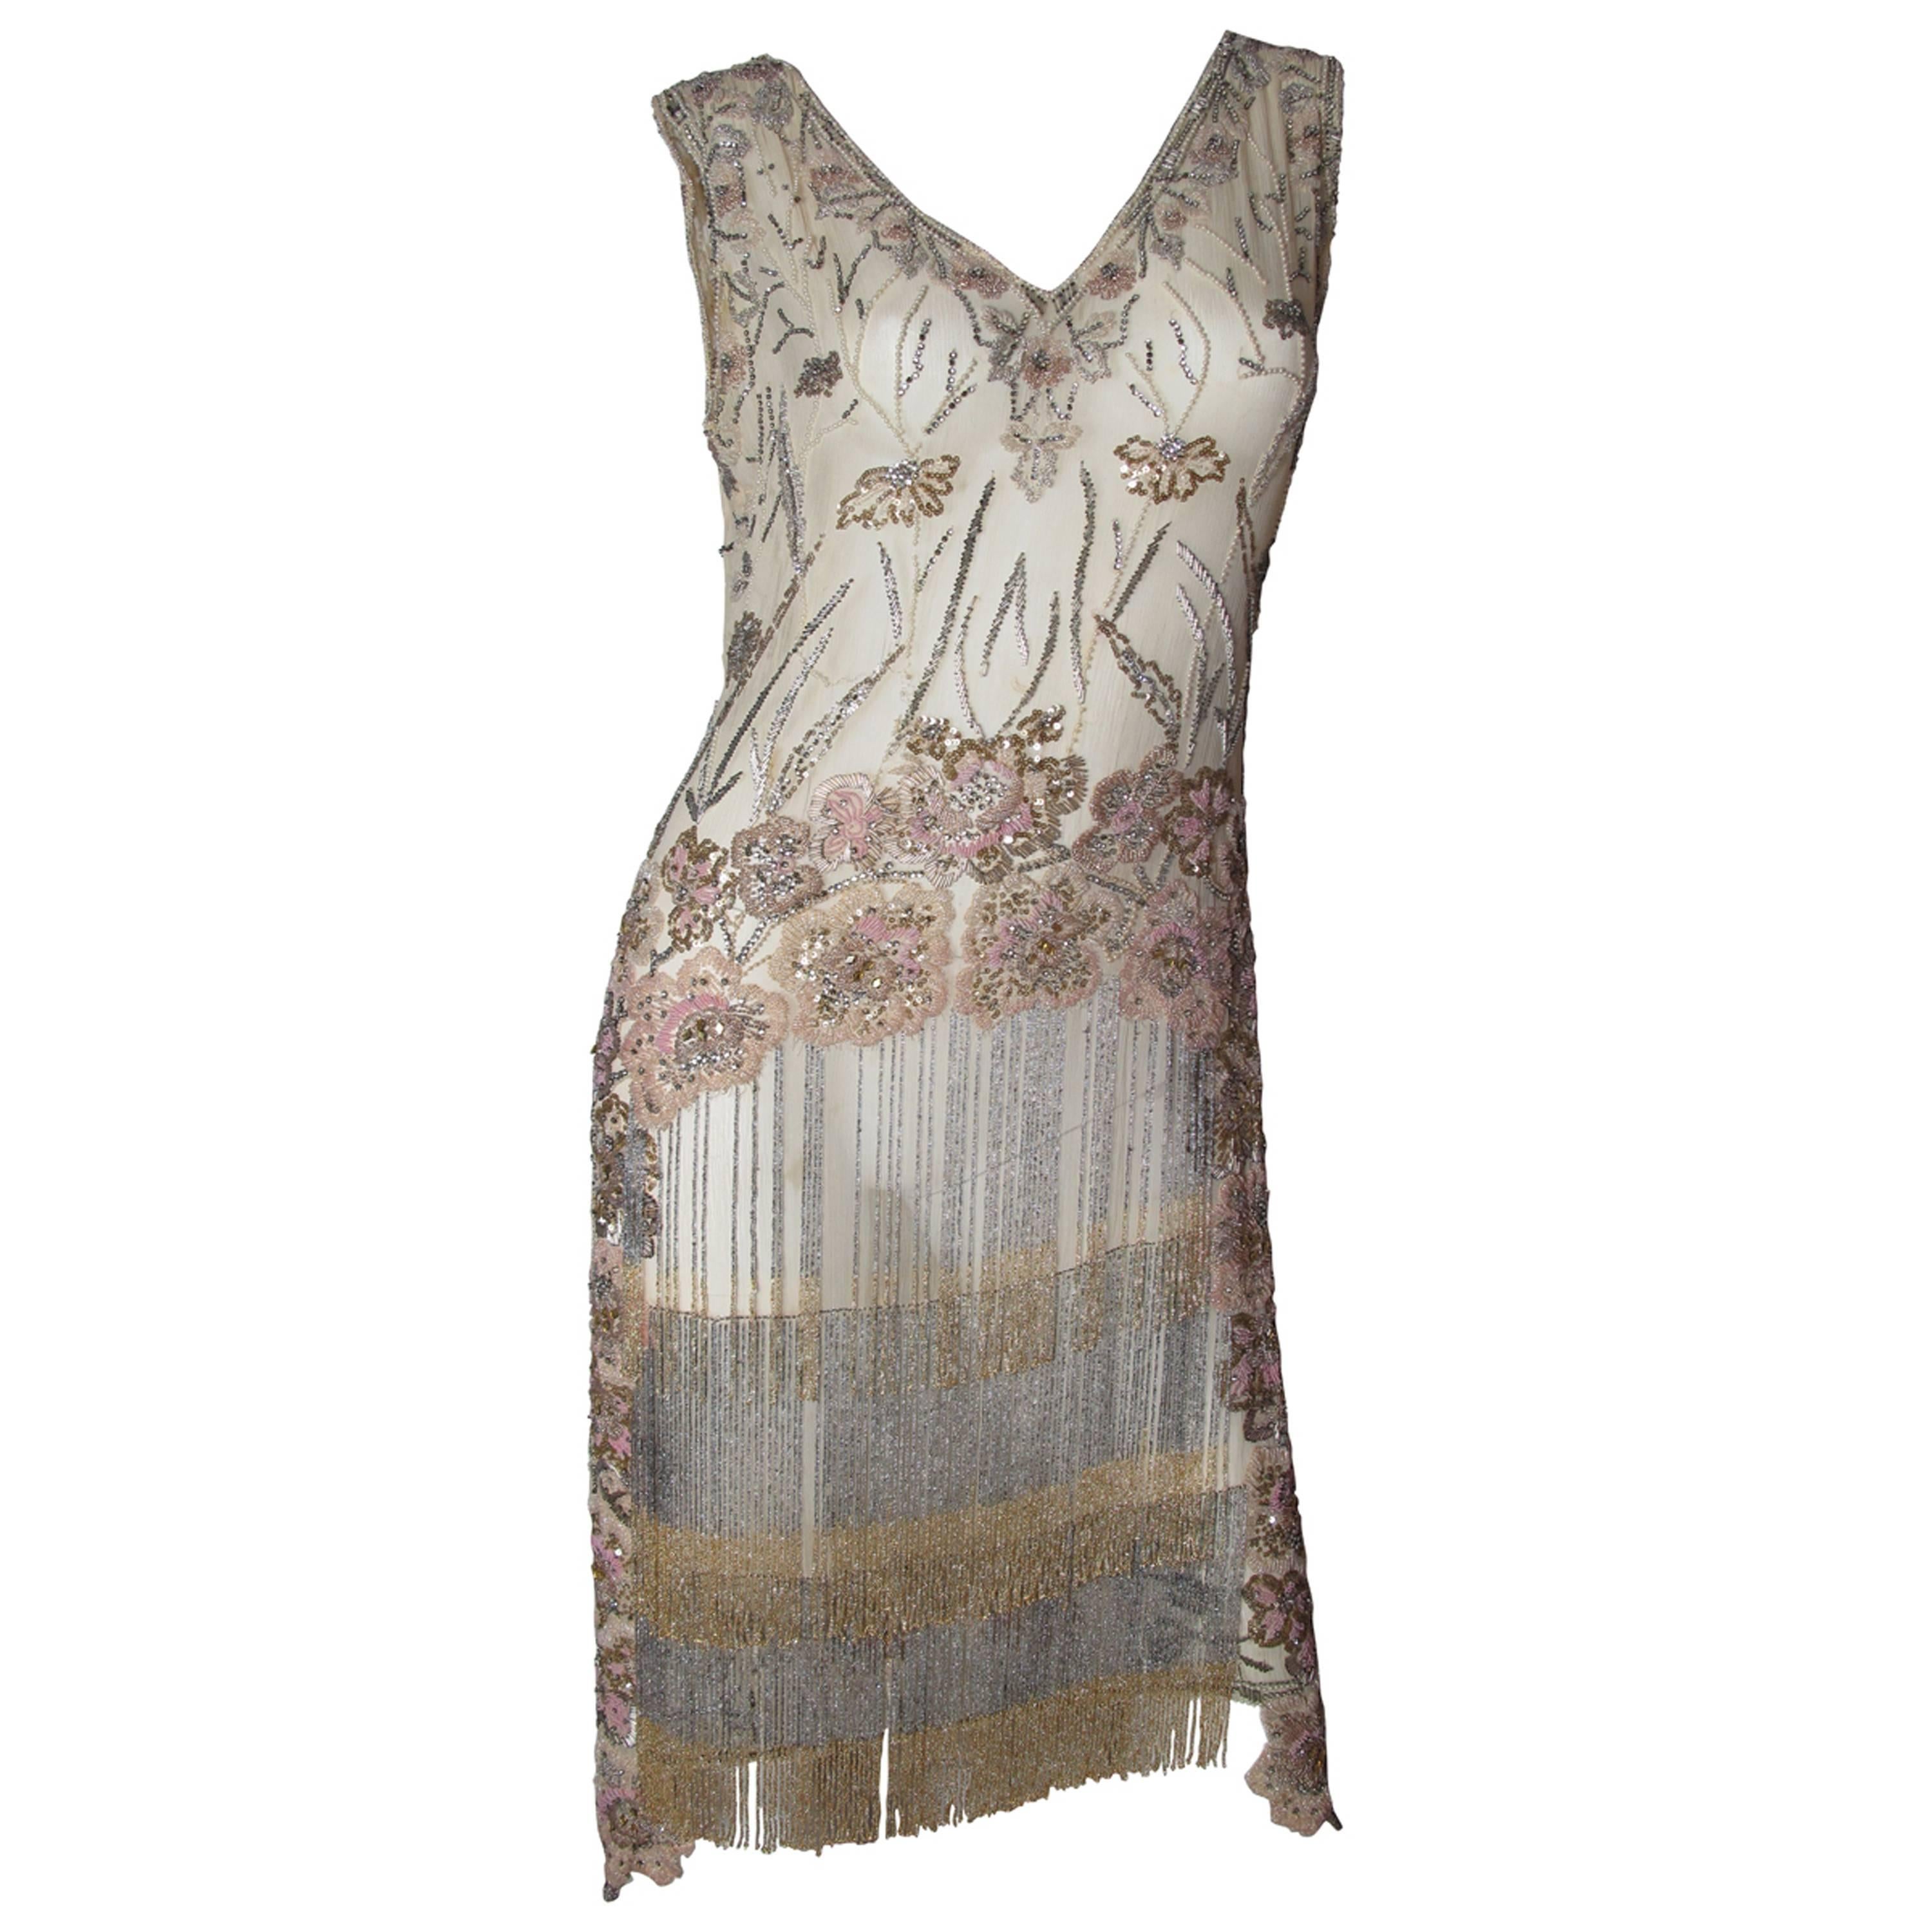 Gorgeous 1920s Beaded, Rhinestone and Sequin Flapper Dress -sale